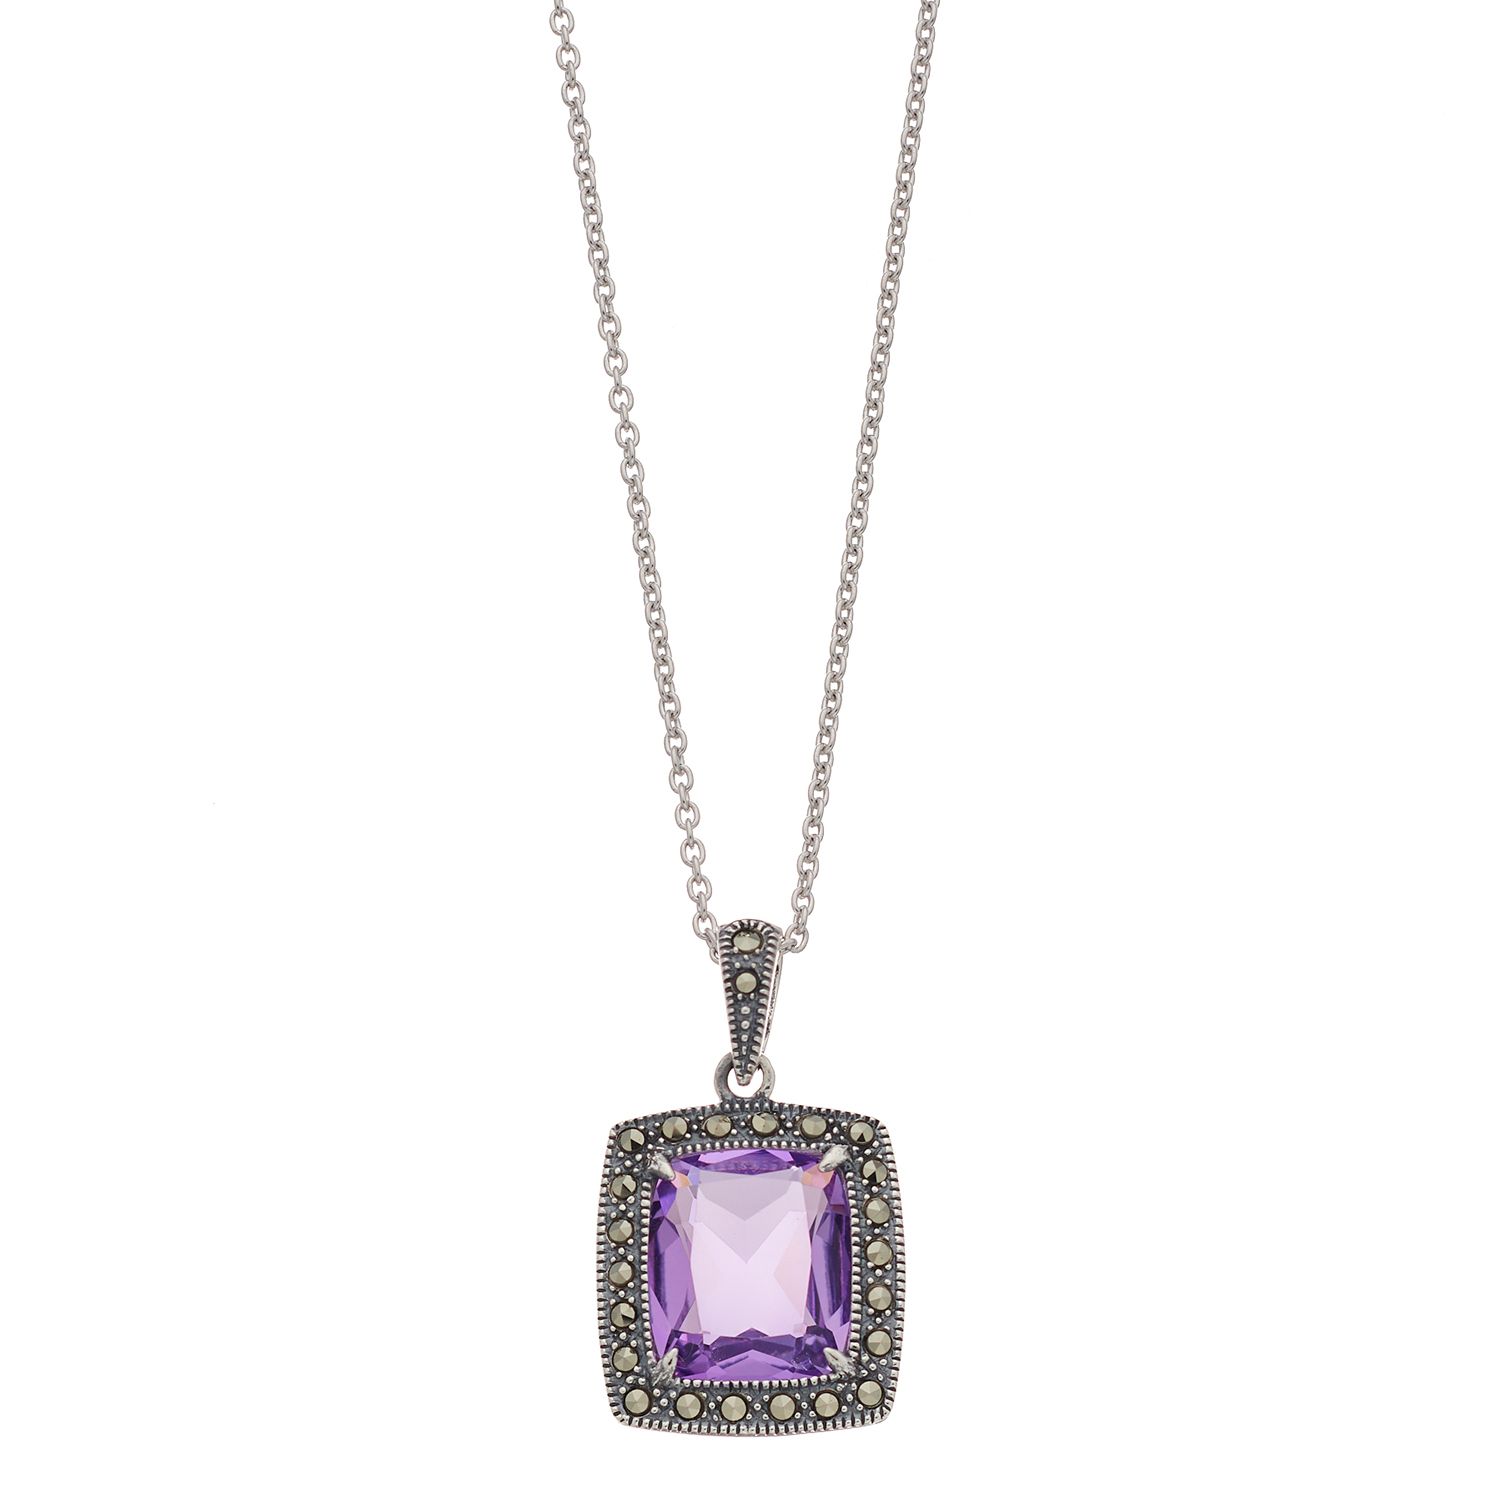 Image for Lavish by TJM Sterling Silver Lab-Created Amethyst & Marcasite Cushion Pendant Necklace at Kohl's.